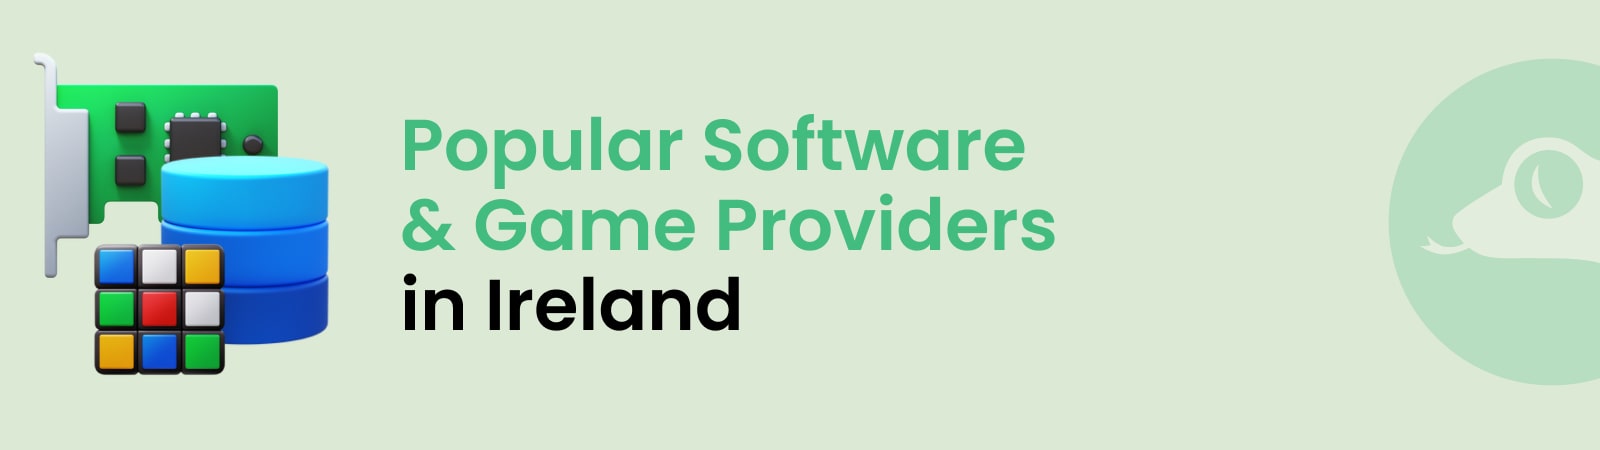 popular software game providers in ireland